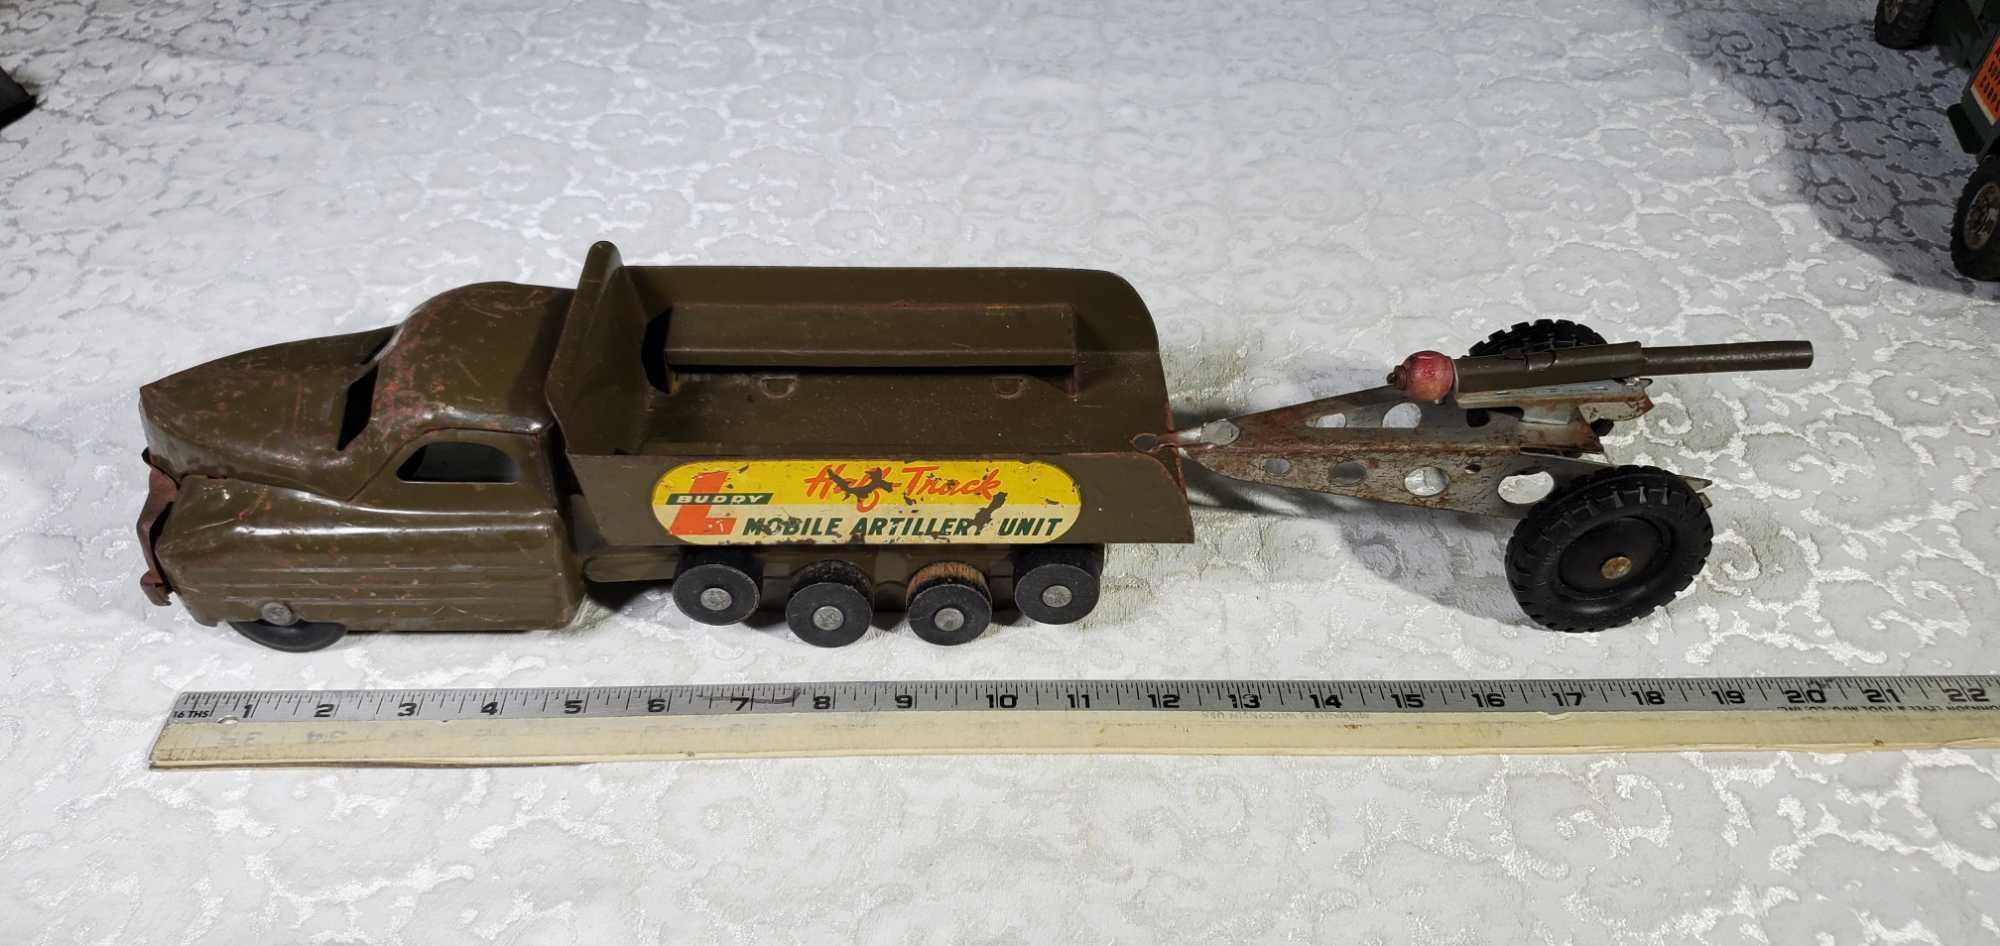 Buddy L WWII Pressed Steel Vehicles, Marx Wind Up, and Large Plastic Model Plane